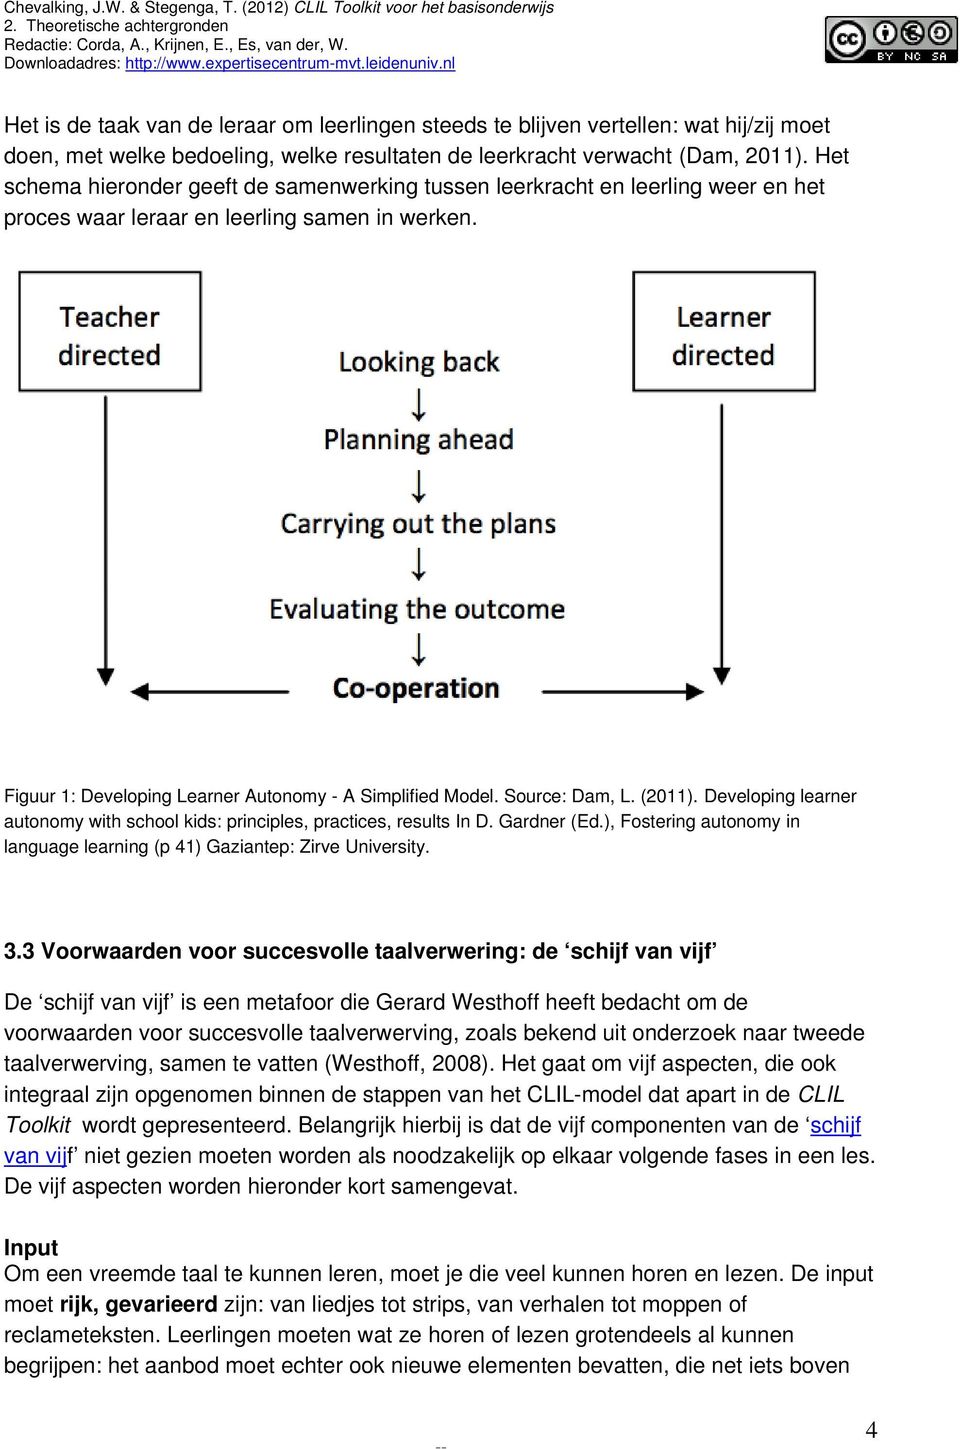 Source: Dam, L. (2011). Developing learner autonomy with school kids: principles, practices, results In D. Gardner (Ed.), Fostering autonomy in language learning (p 41) Gaziantep: Zirve University. 3.